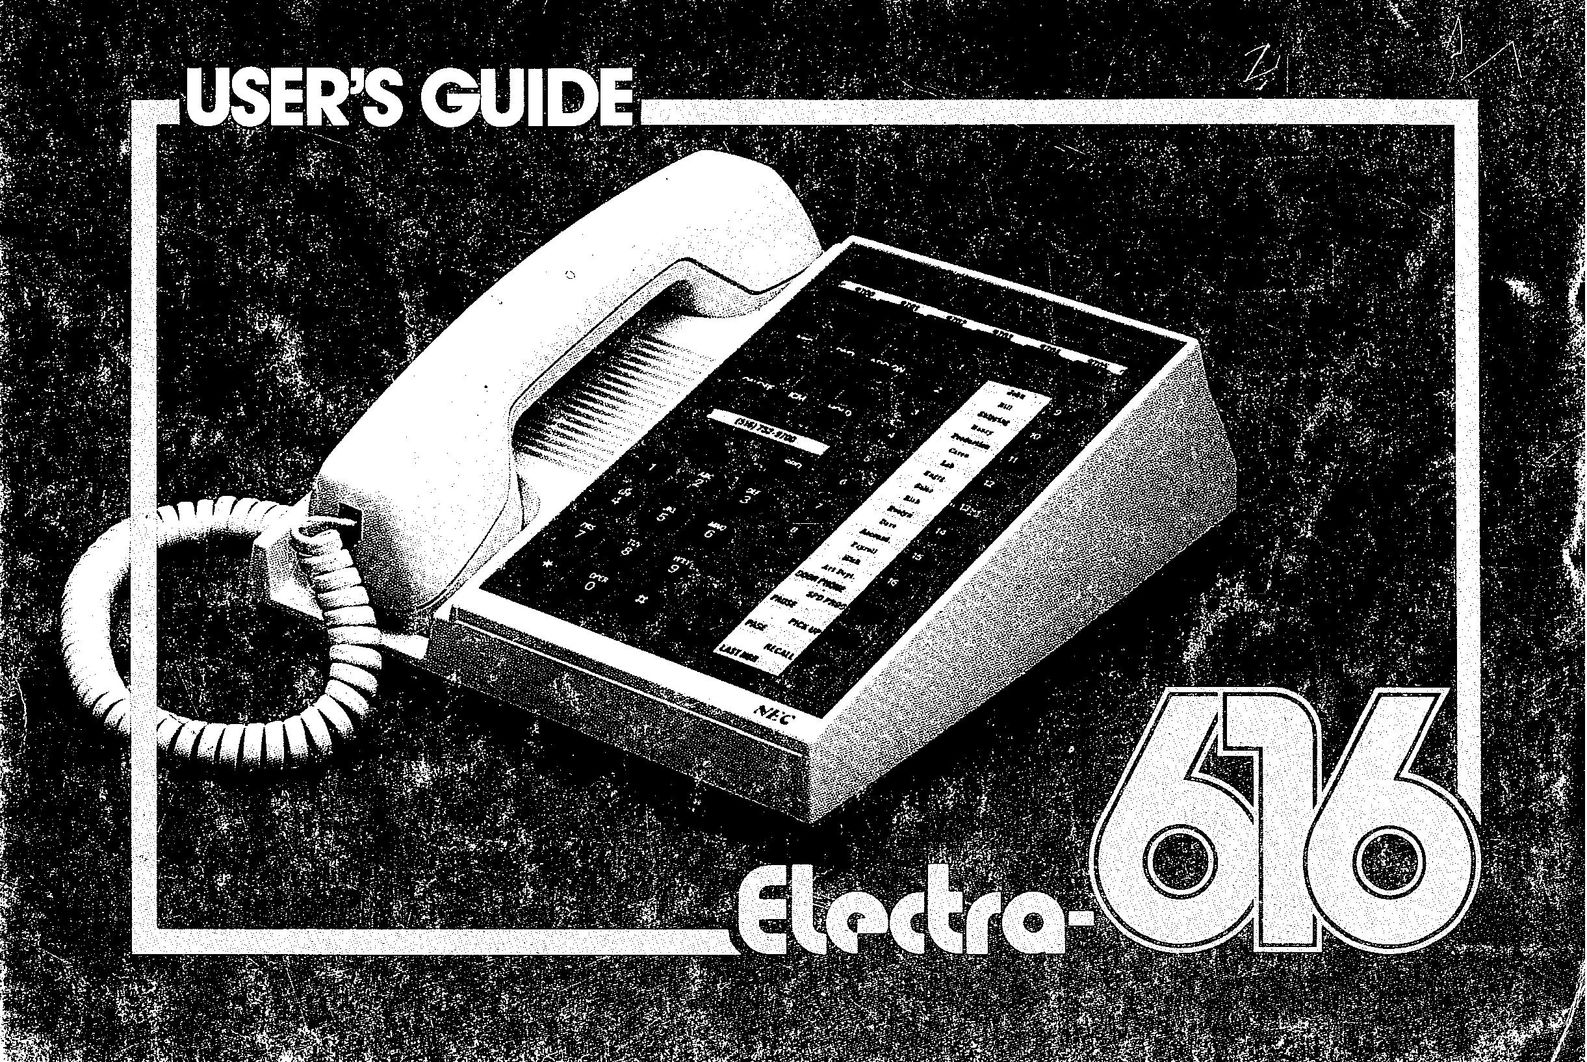 Electra Accessories 616 Answering Machine User Manual